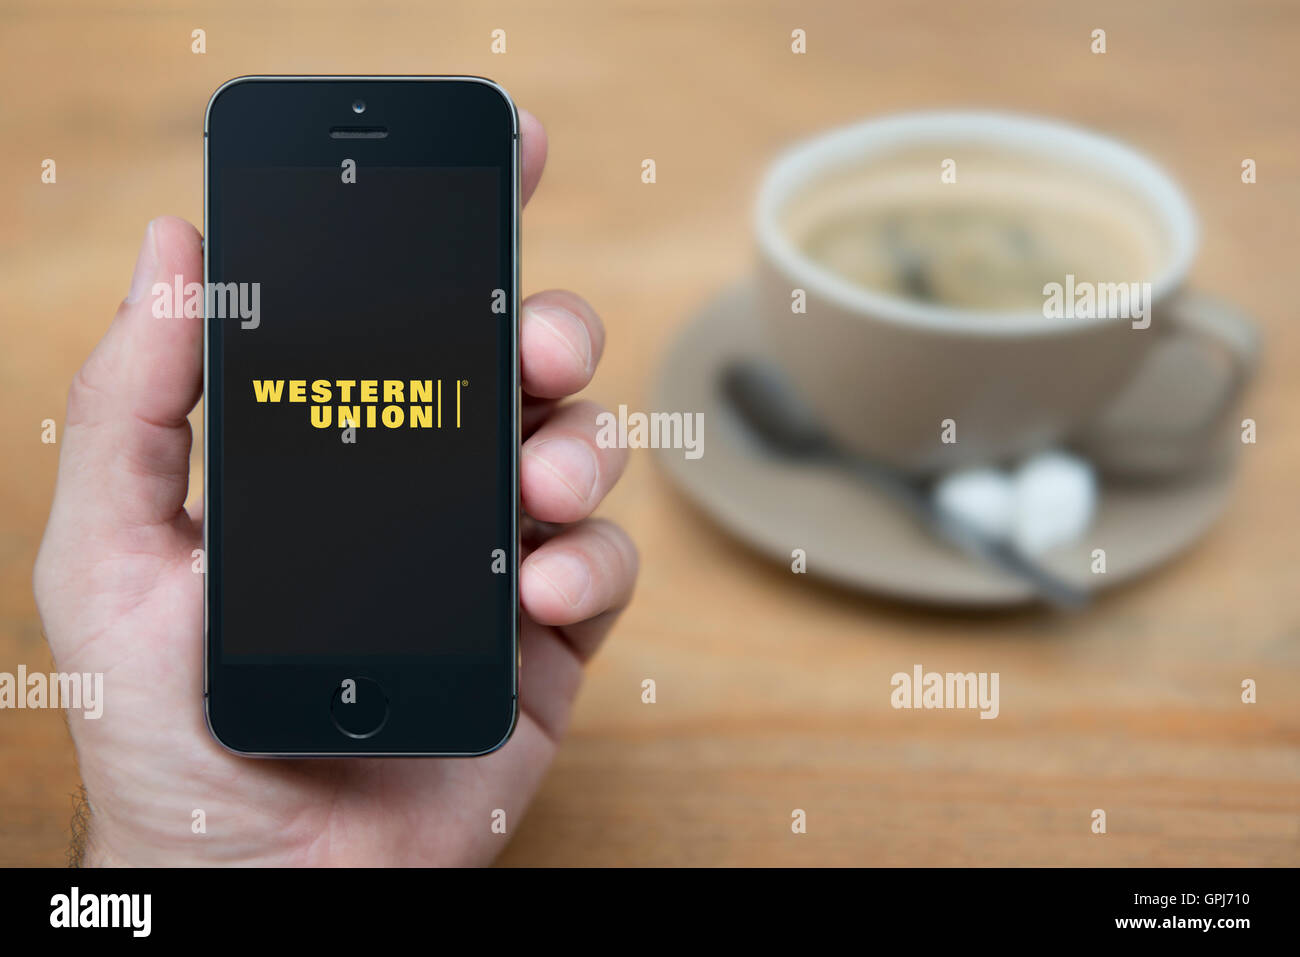 A man looks at his iPhone which displays the Western Union logo, while sat with a cup of coffee (Editorial use only). Stock Photo